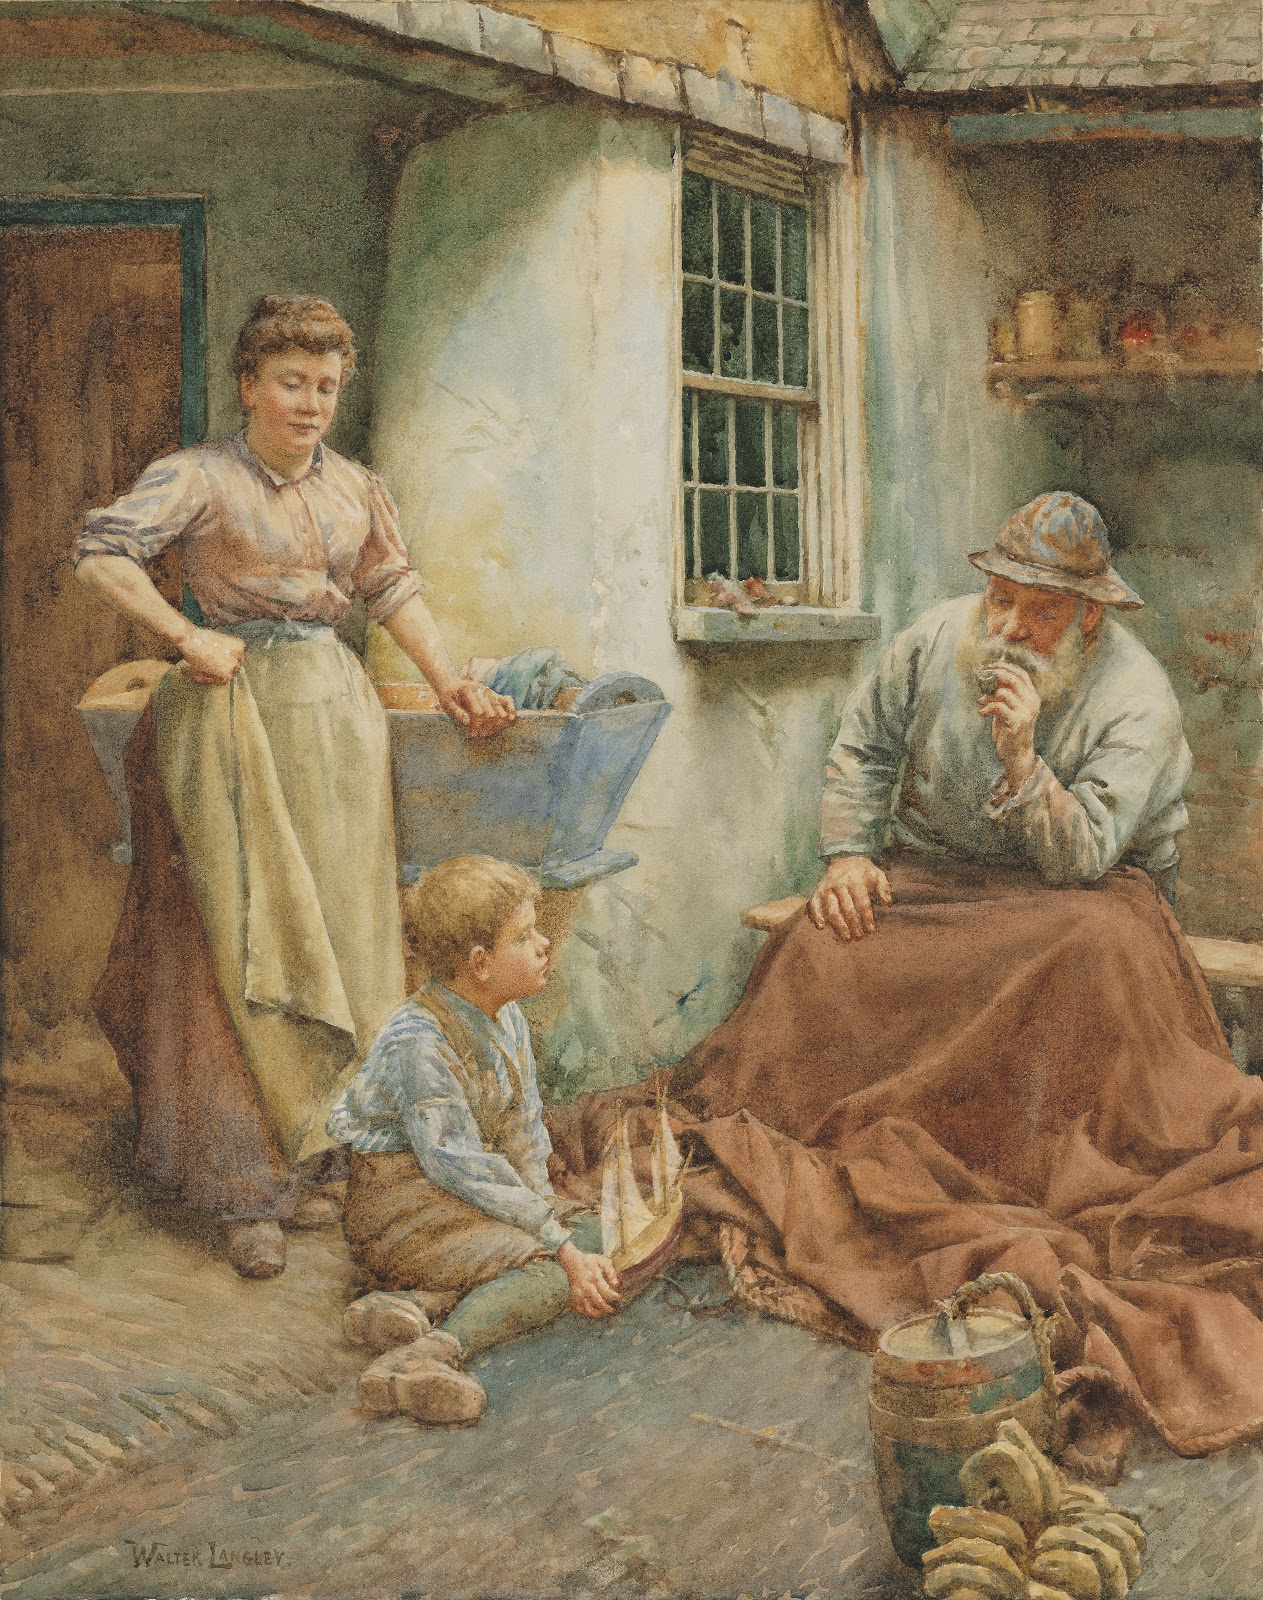 Walter Langley The fishermans tales